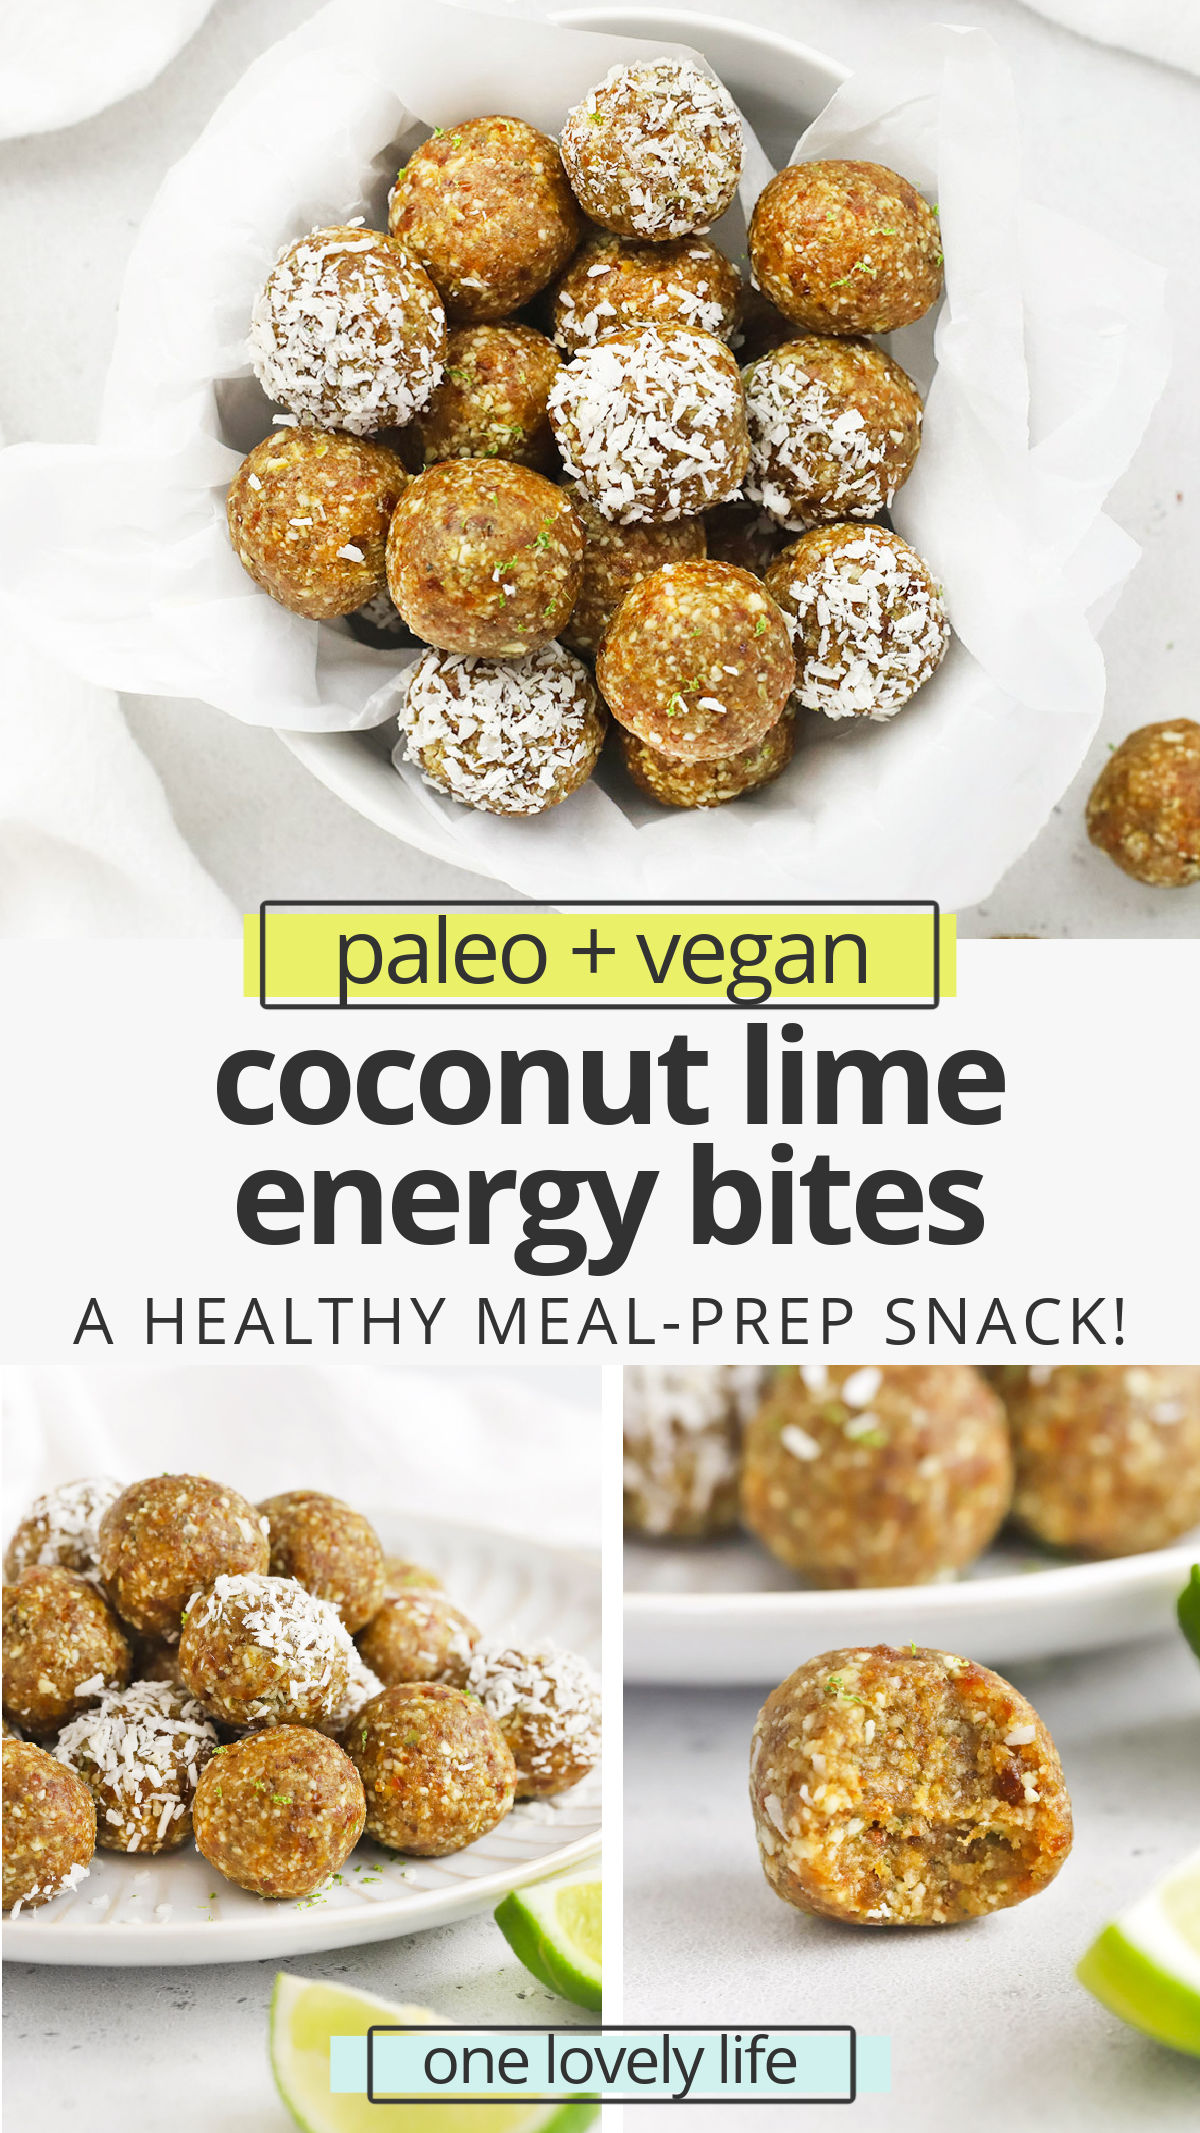 Coconut Lime Energy Bites - These nut-free lime energy bites are perfect for meal prep, healthy snacking, or packing in lunches. (Gluten free, vegan, and paleo approved!) // Nut Free snack // Nut free lunch idea // Nut free energy bites //